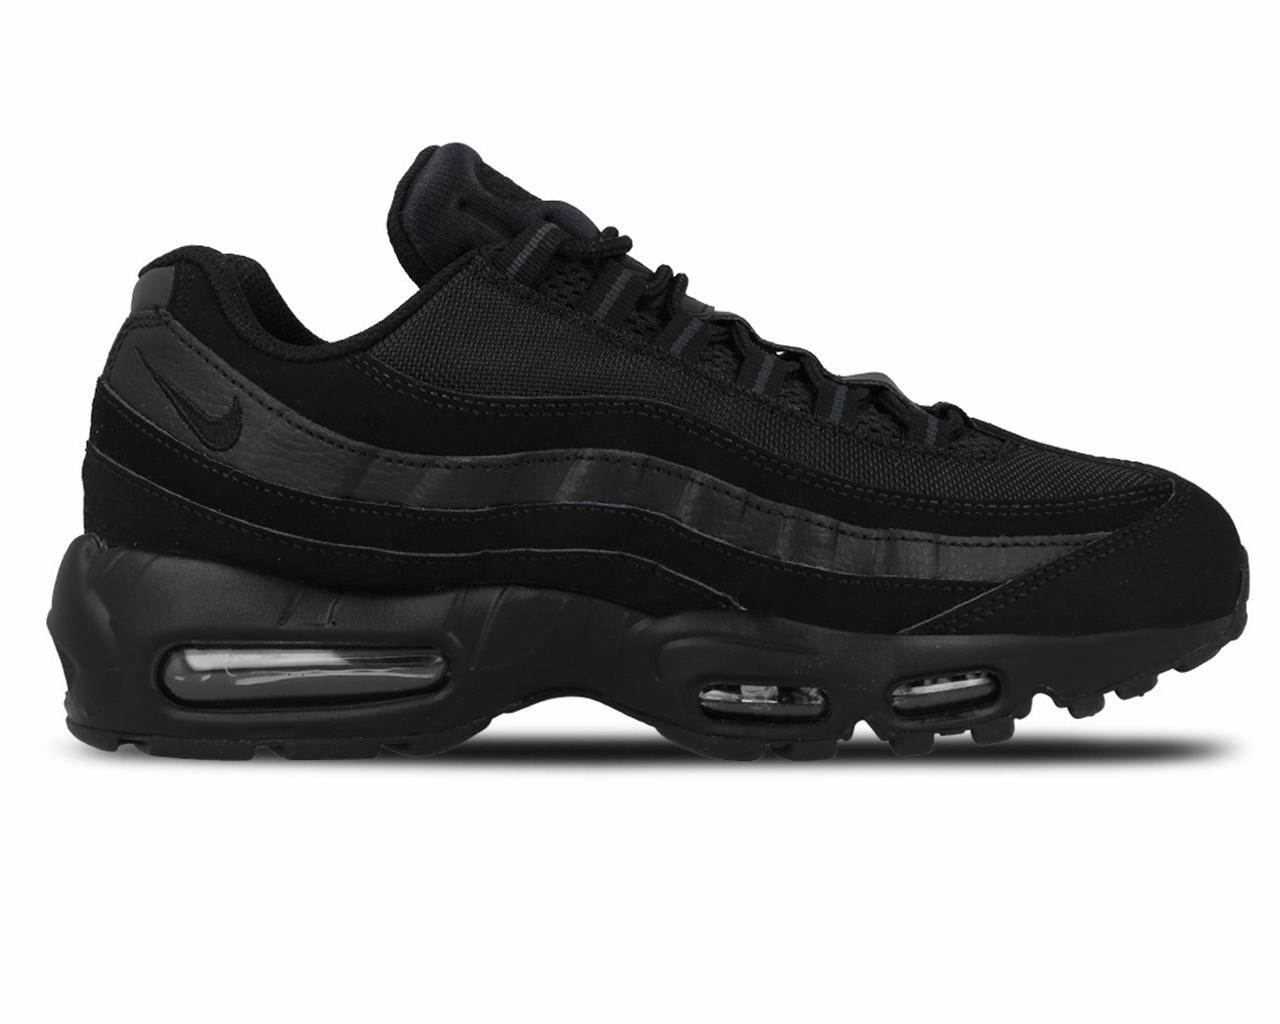 Details about Nike Air Max 95 609048 092 Mens Trainers Black